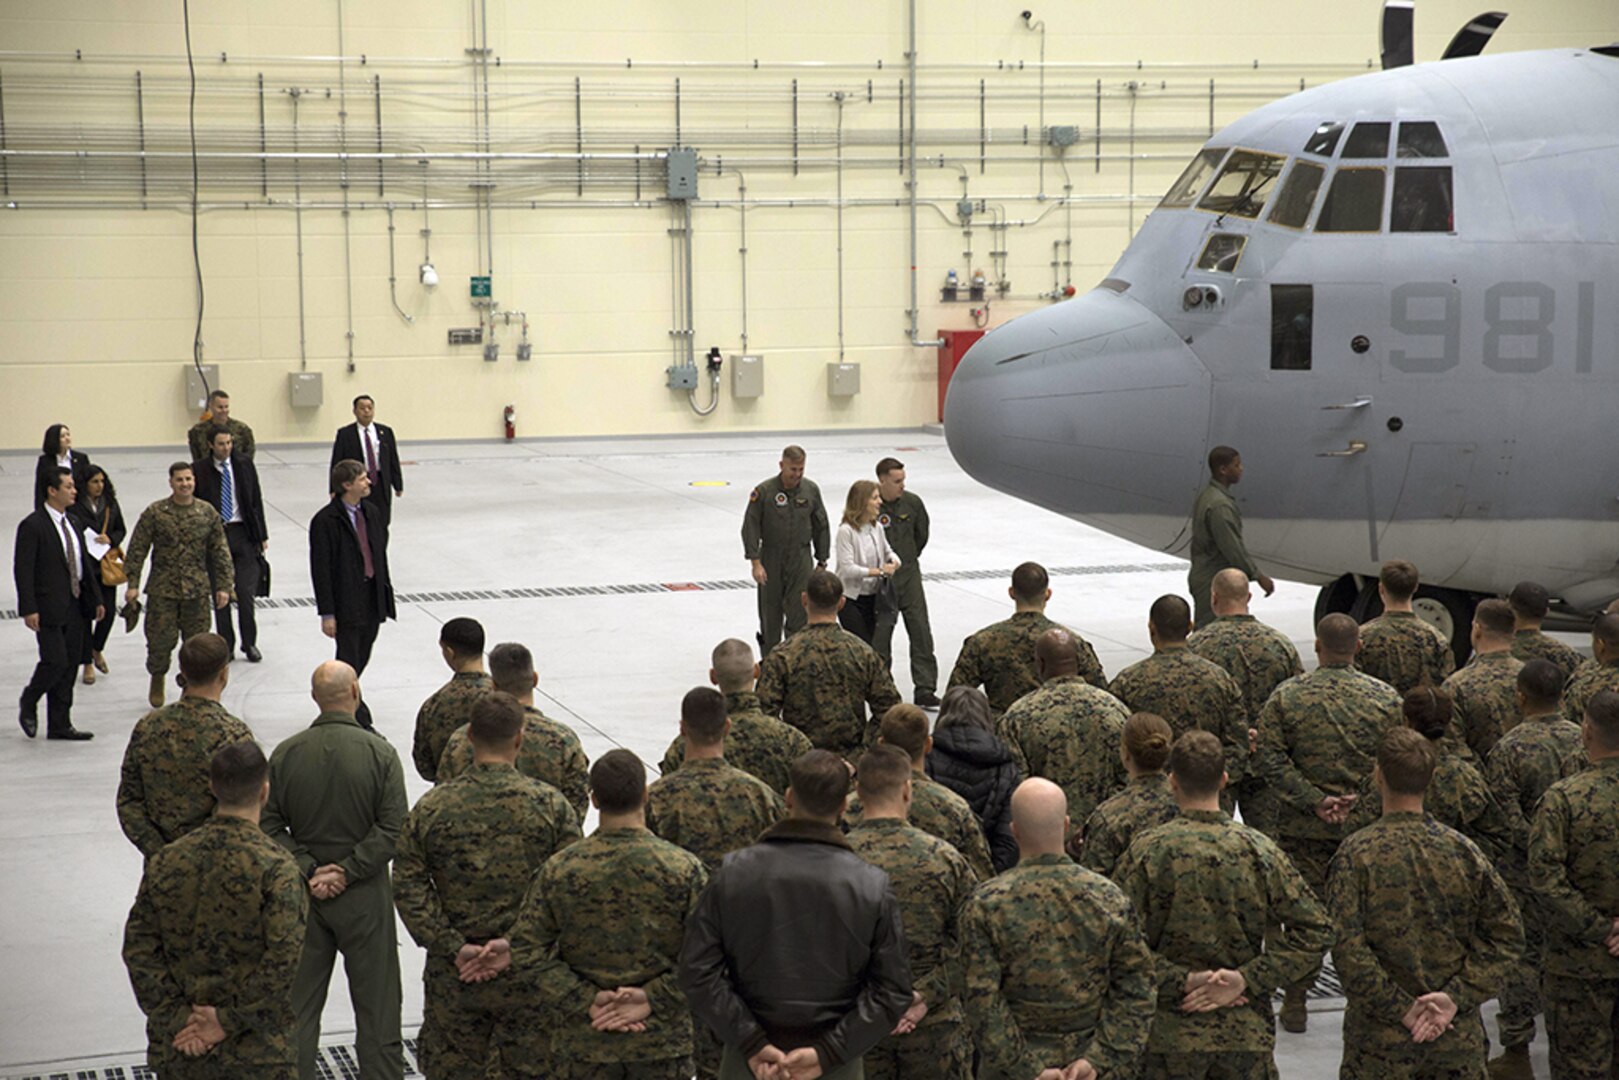 MARINE CORPS AIR STATION IWAKUNI, Japan (Jan. 28, 2016) - Ambassador Caroline Bouvier Kennedy, U.S. ambassador to Japan, speaks to Marines with Marine Aerial Refueler Transport Squadron 152 (VMGR-152).  This is Ambassador Kennedy's first official visit to Marine Corps Air Station Iwakuni. While at the squadron's hangar, Kennedy viewed a KC-130J Super Hercules, gaining an understanding on the multiple capabilities of the aircraft in the Pacific theater. This visit also helped the ambassador better understand MCAS Iwakuni's community and witness the ongoing transformation of the air station through the multitude of construction projects. 